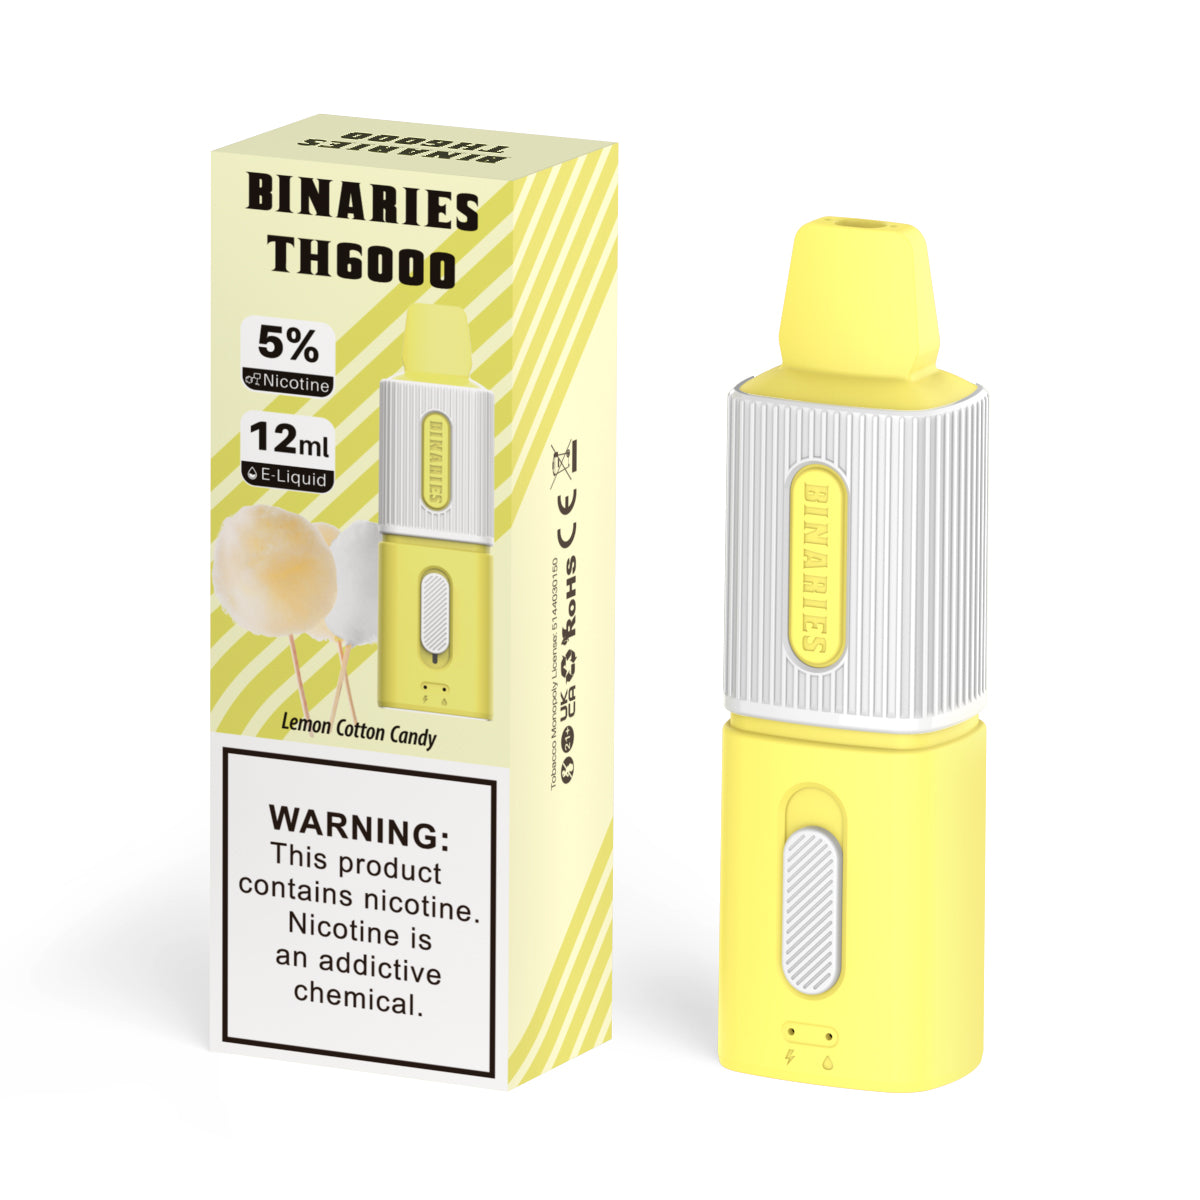 Binaries Cabin Disposable TH | 6000 Puffs | 12mL | 50mg Lemon Cotton Candy with Packaging